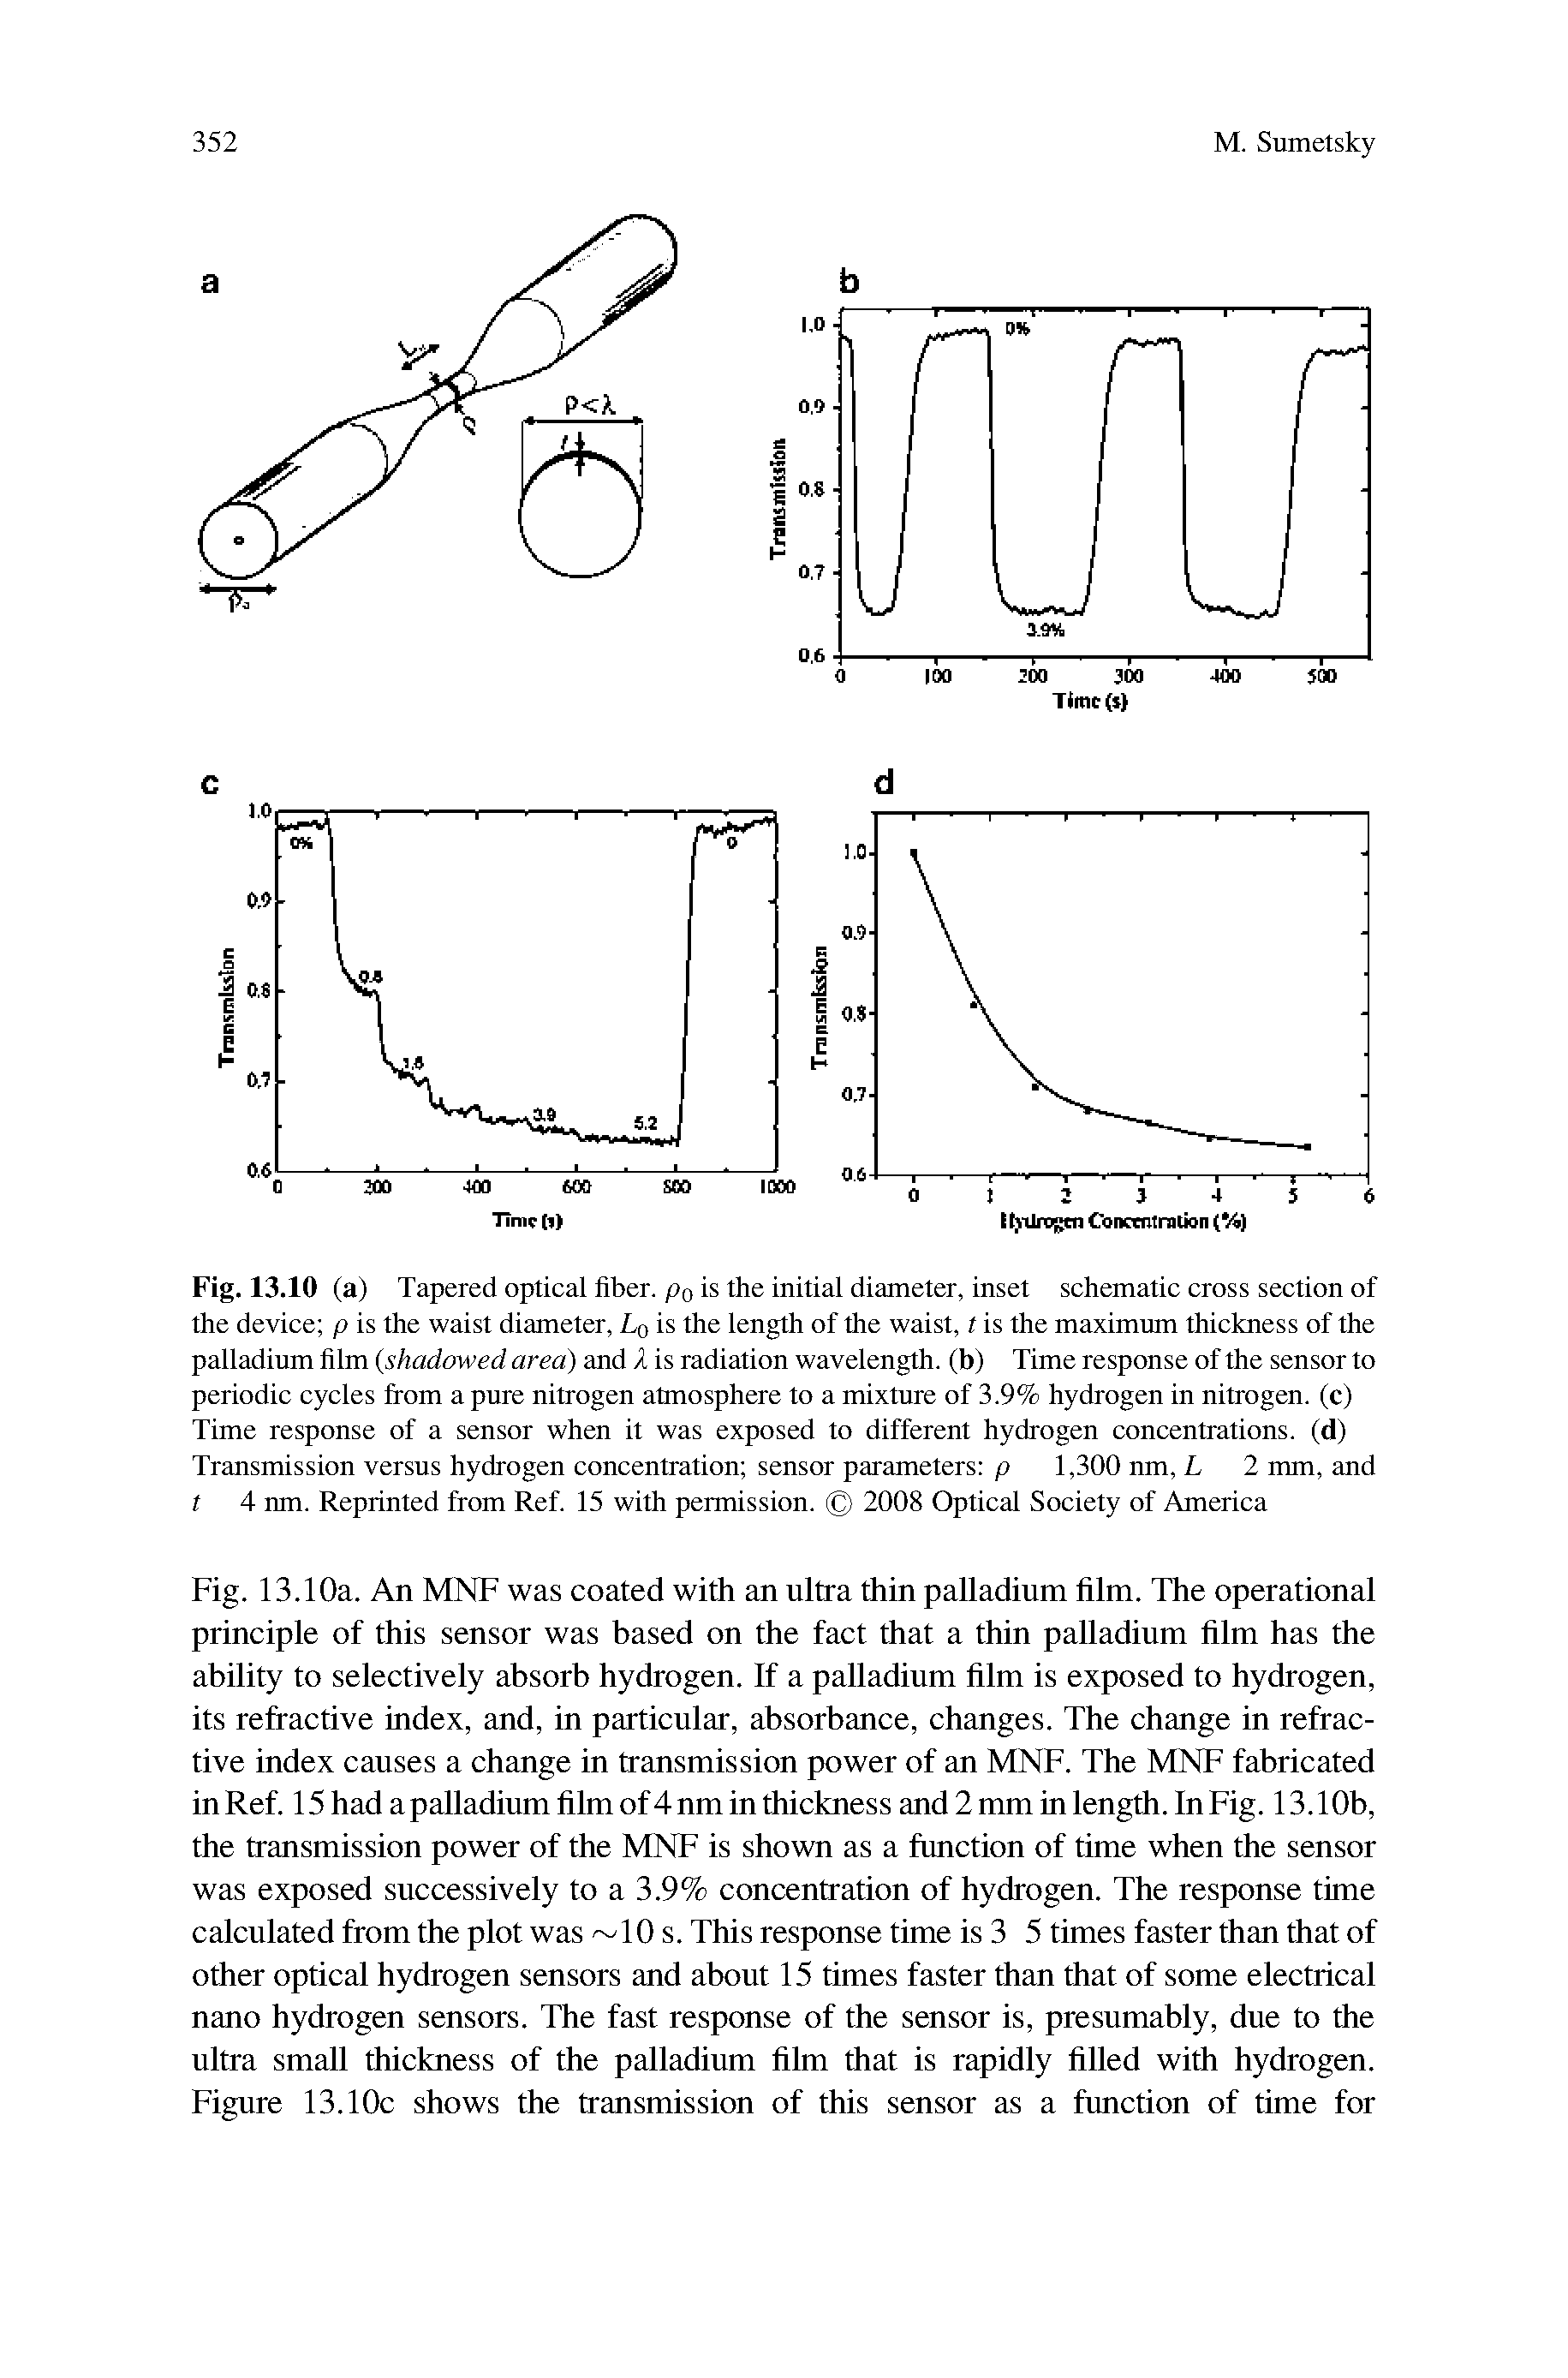 Fig. 13.10a. An MNF was coated with an ultra thin palladium film. The operational principle of this sensor was based on the fact that a thin palladium film has the ability to selectively absorb hydrogen. If a palladium film is exposed to hydrogen, its refractive index, and, in particular, absorbance, changes. The change in refractive index causes a change in transmission power of an MNF. The MNF fabricated in Ref. 15 had a palladium film of 4 nm in thickness and 2 mm in length. In Fig. 13.10b, the transmission power of the MNF is shown as a function of time when the sensor was exposed successively to a 3.9% concentration of hydrogen. The response time calculated from the plot was 10 s. This response time is 3 5 times faster than that of other optical hydrogen sensors and about 15 times faster than that of some electrical nano hydrogen sensors. The fast response of the sensor is, presumably, due to the ultra small thickness of the palladium film that is rapidly filled with hydrogen. Figure 13.10c shows the transmission of this sensor as a function of time for...